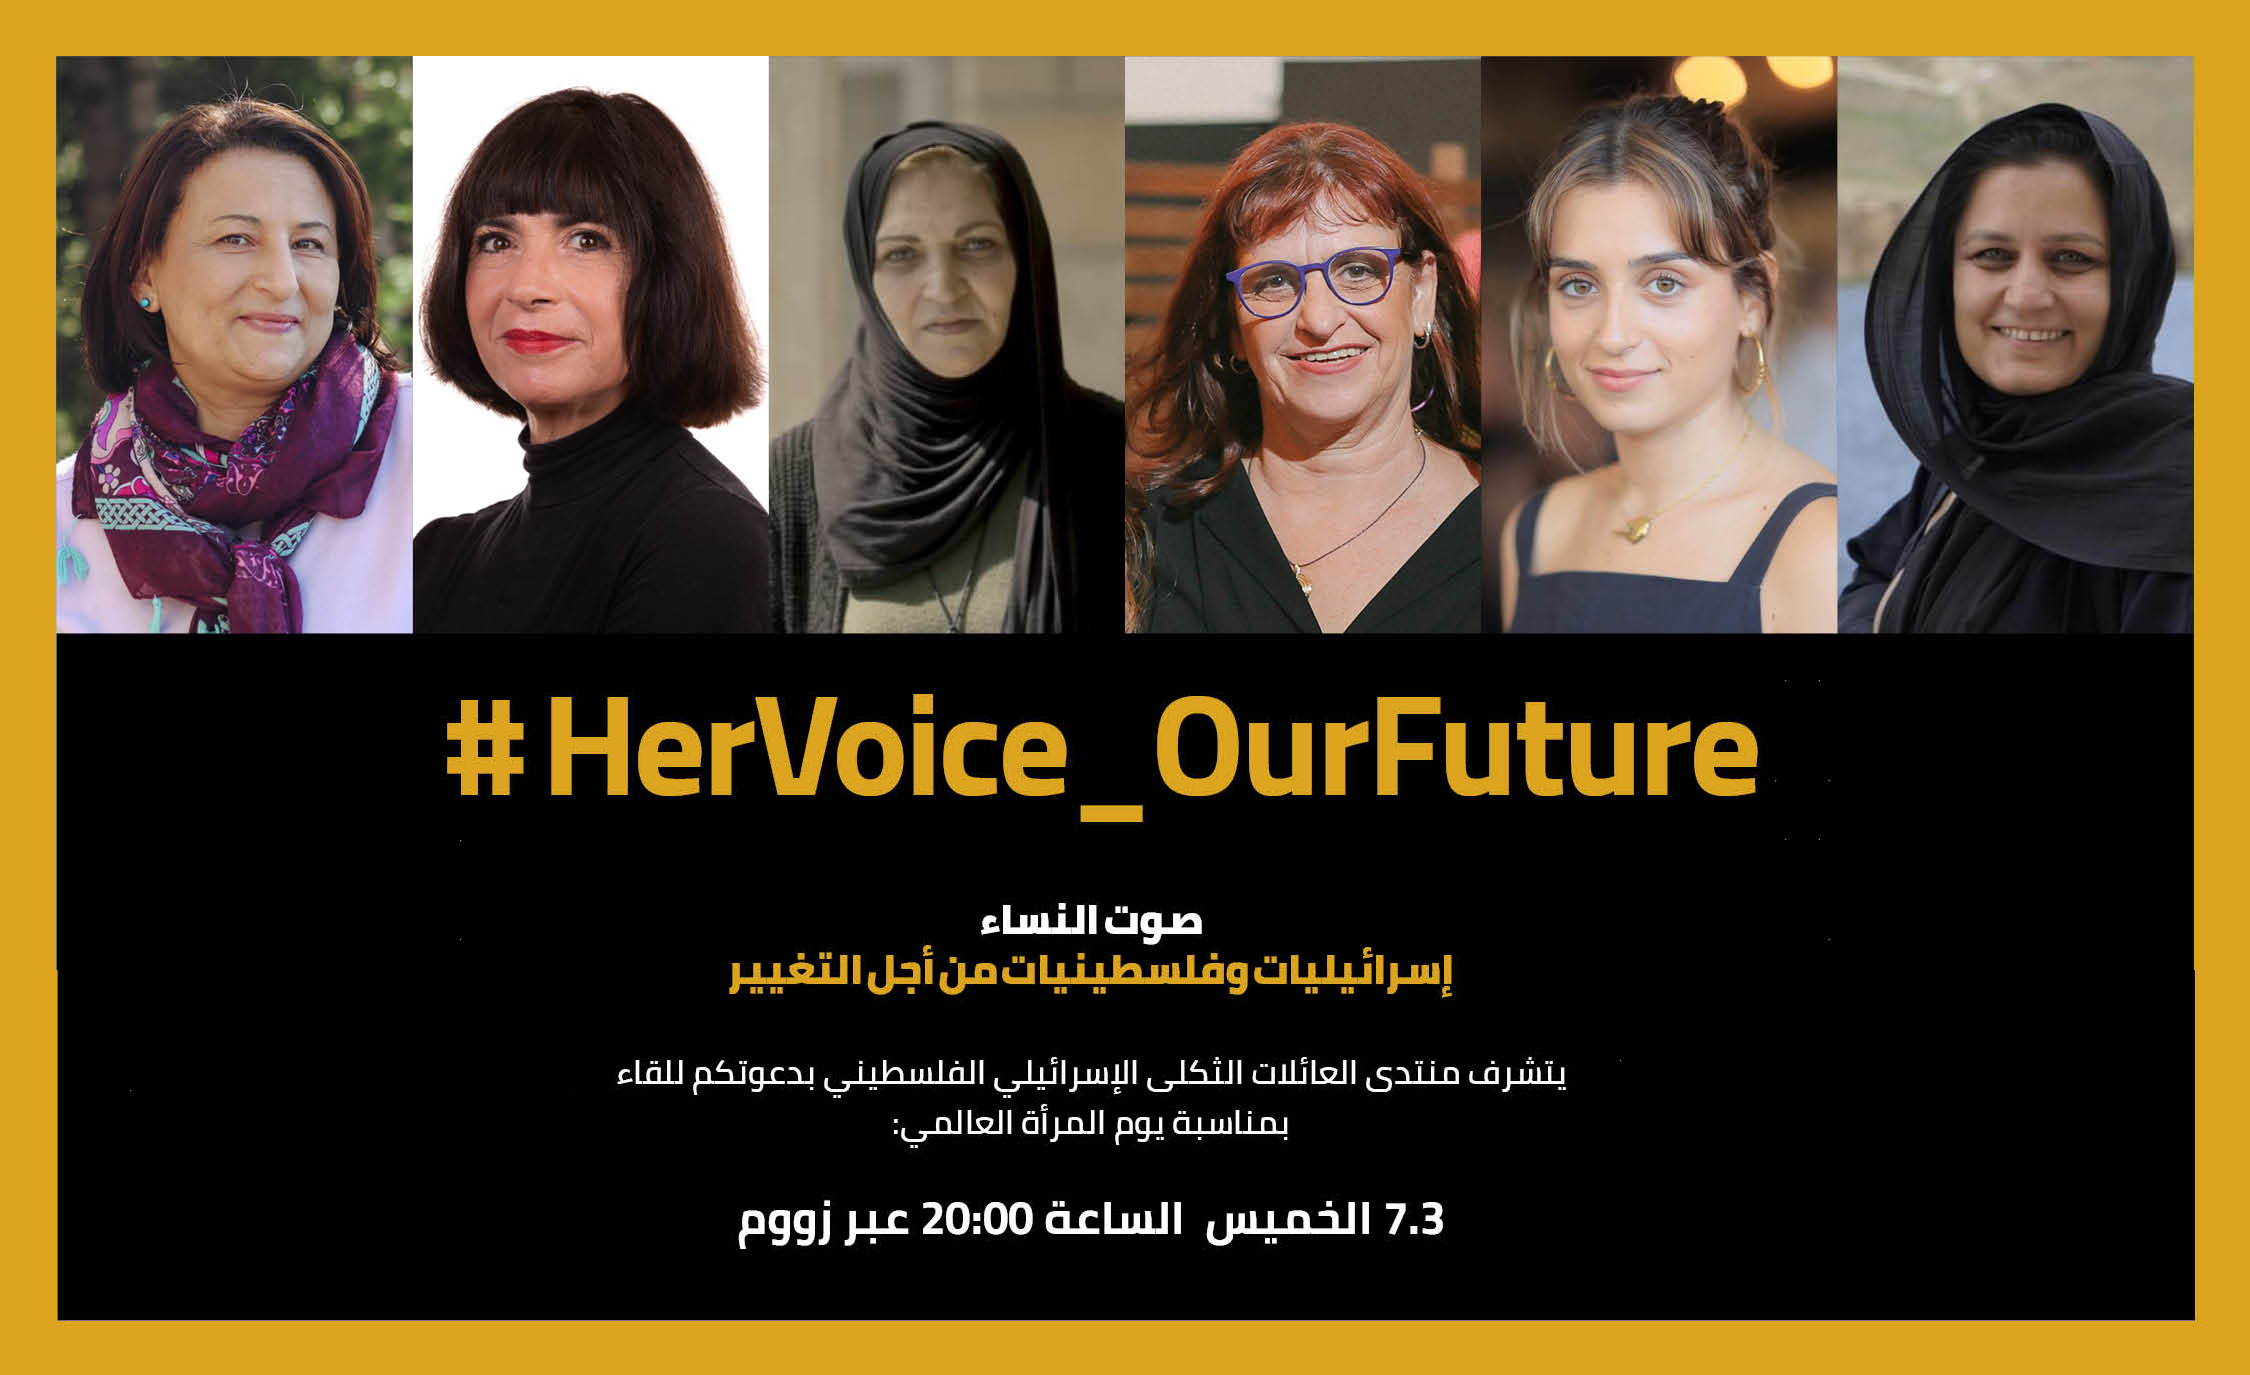 [WEBINAR] Her Voice, Our Future